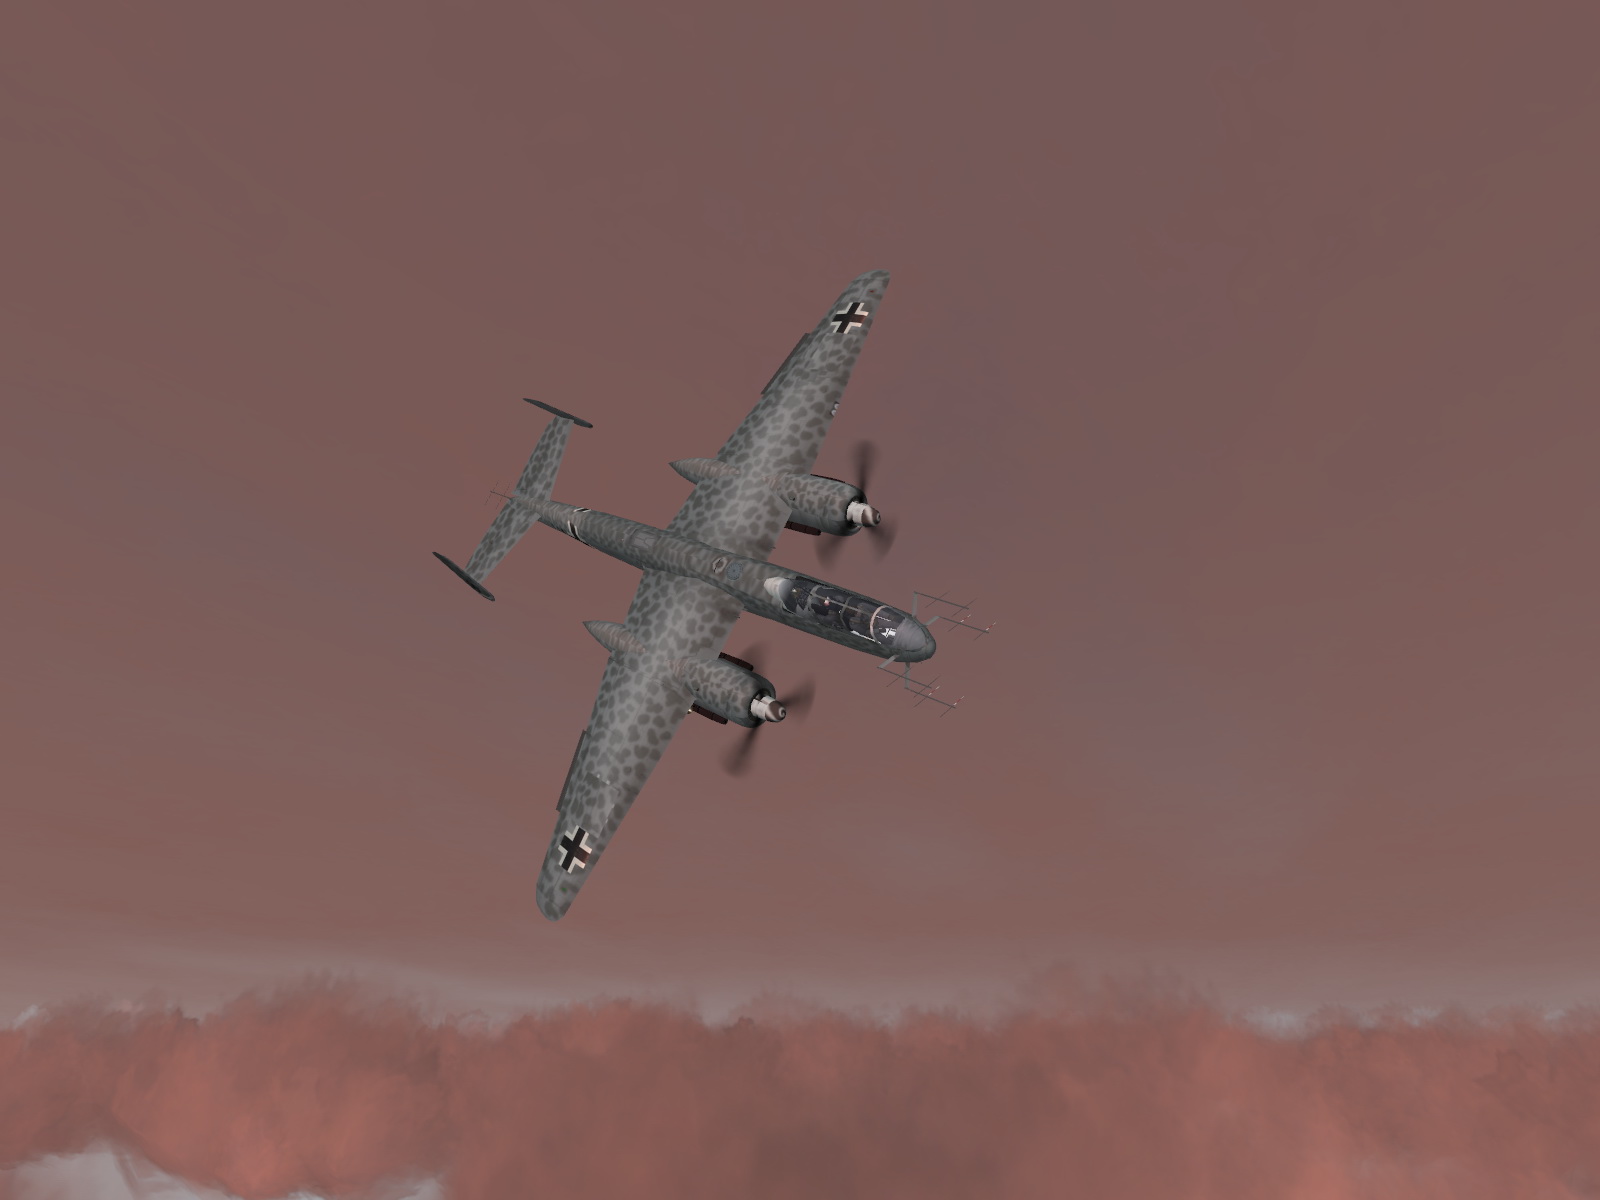 IL2 MH He 219A Nachtjager on dawn patrol over Germany 02